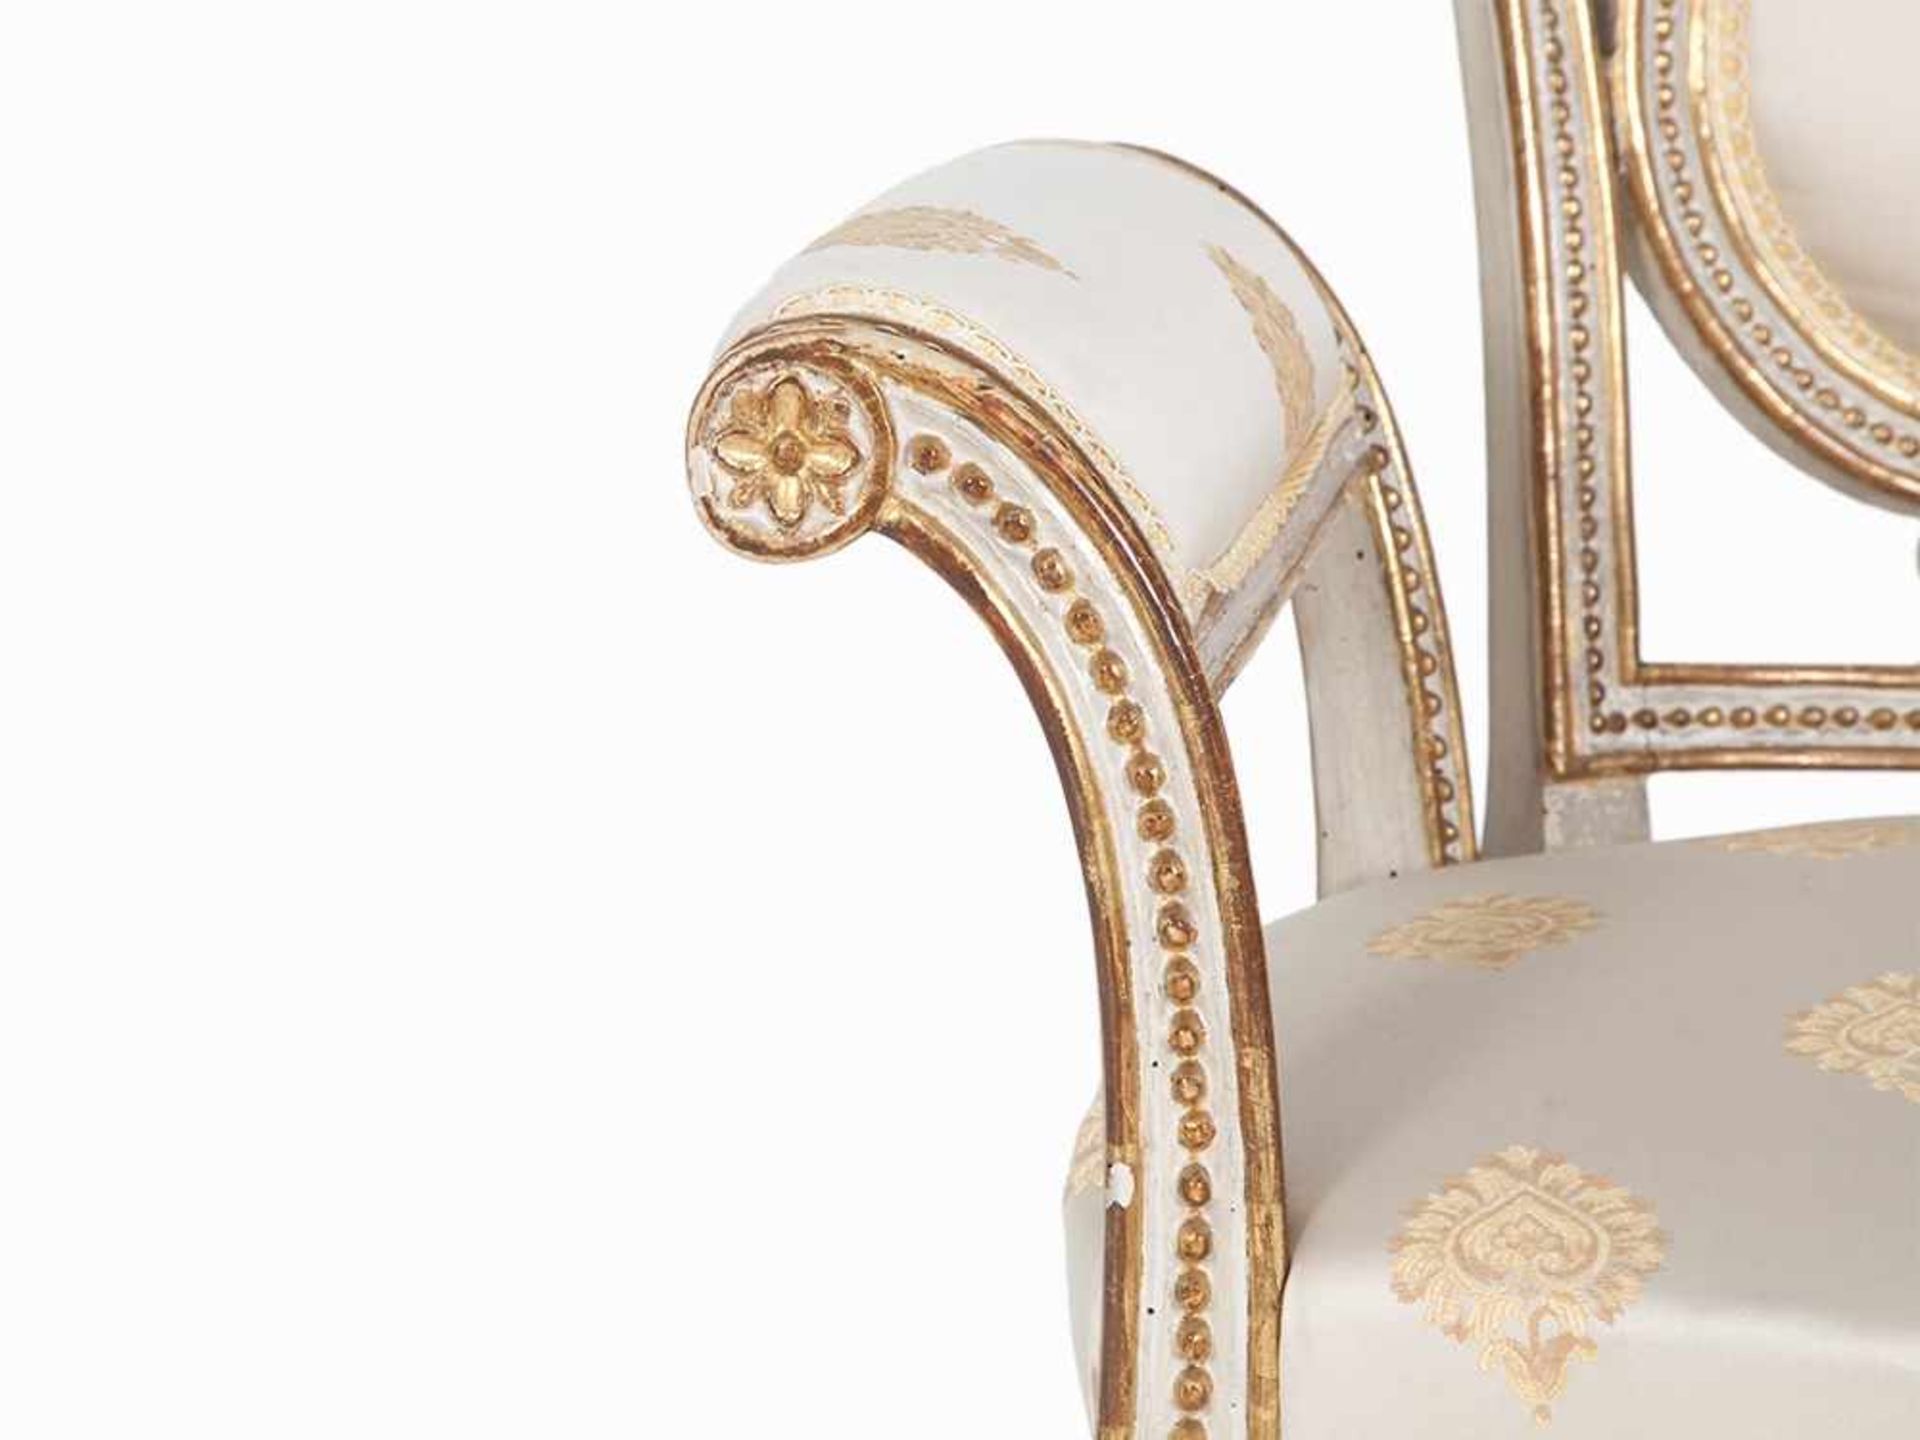 Pair of Armchairs, Lucca, around 1790 Solid wood, carved, white painted and partial gold-plated, - Image 7 of 10